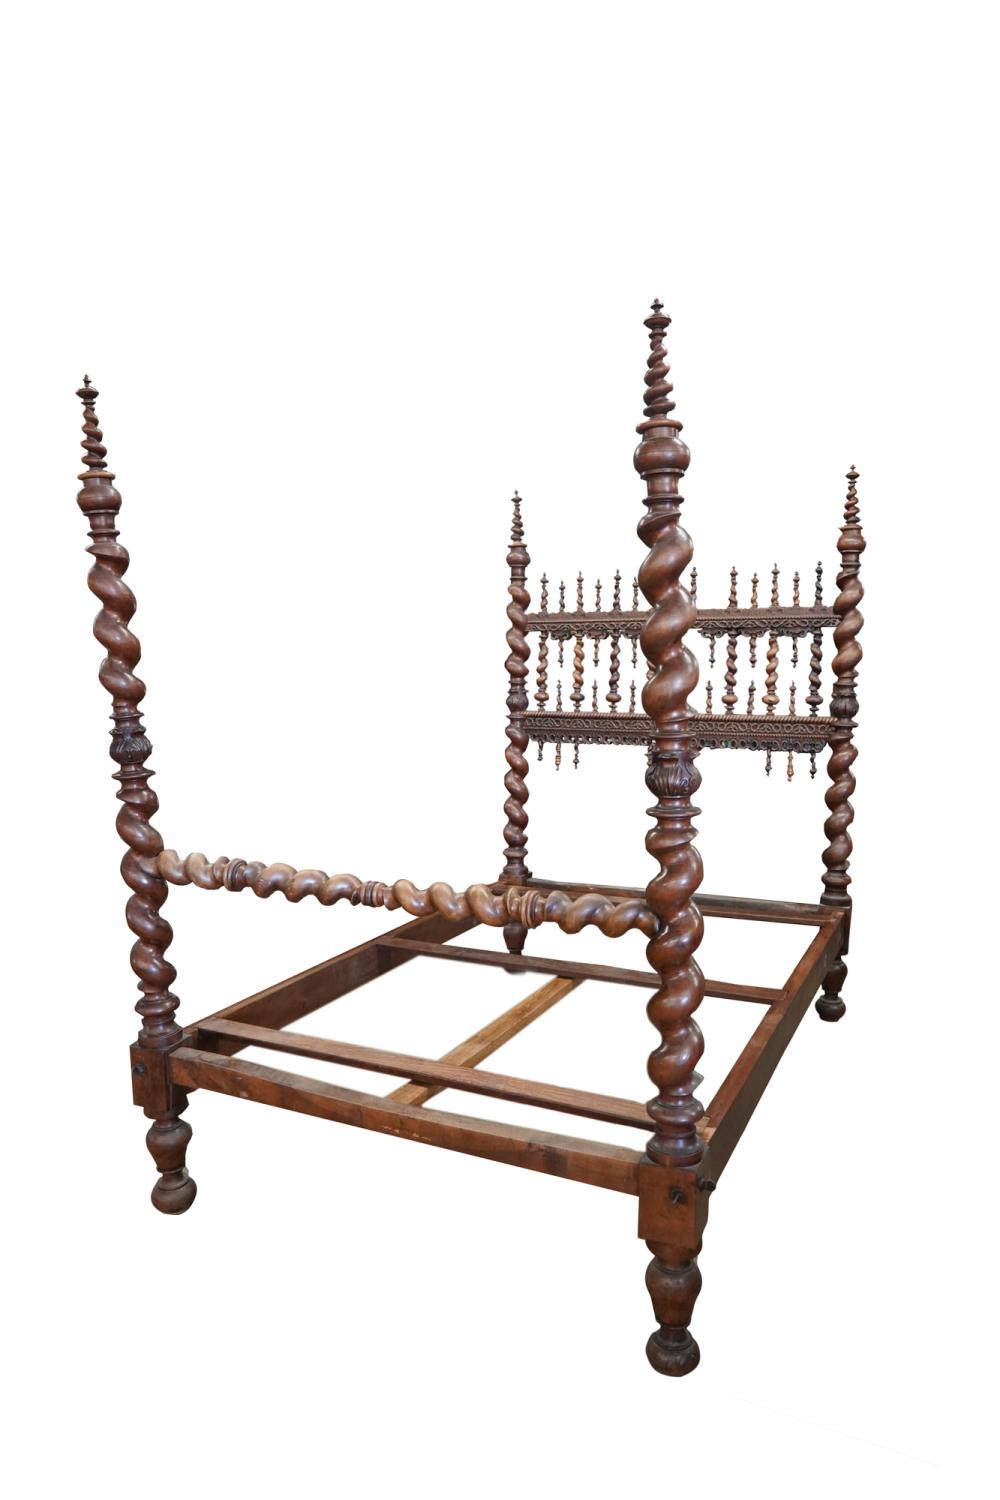 TURNED & CARVED WOOD BEDCondition: the